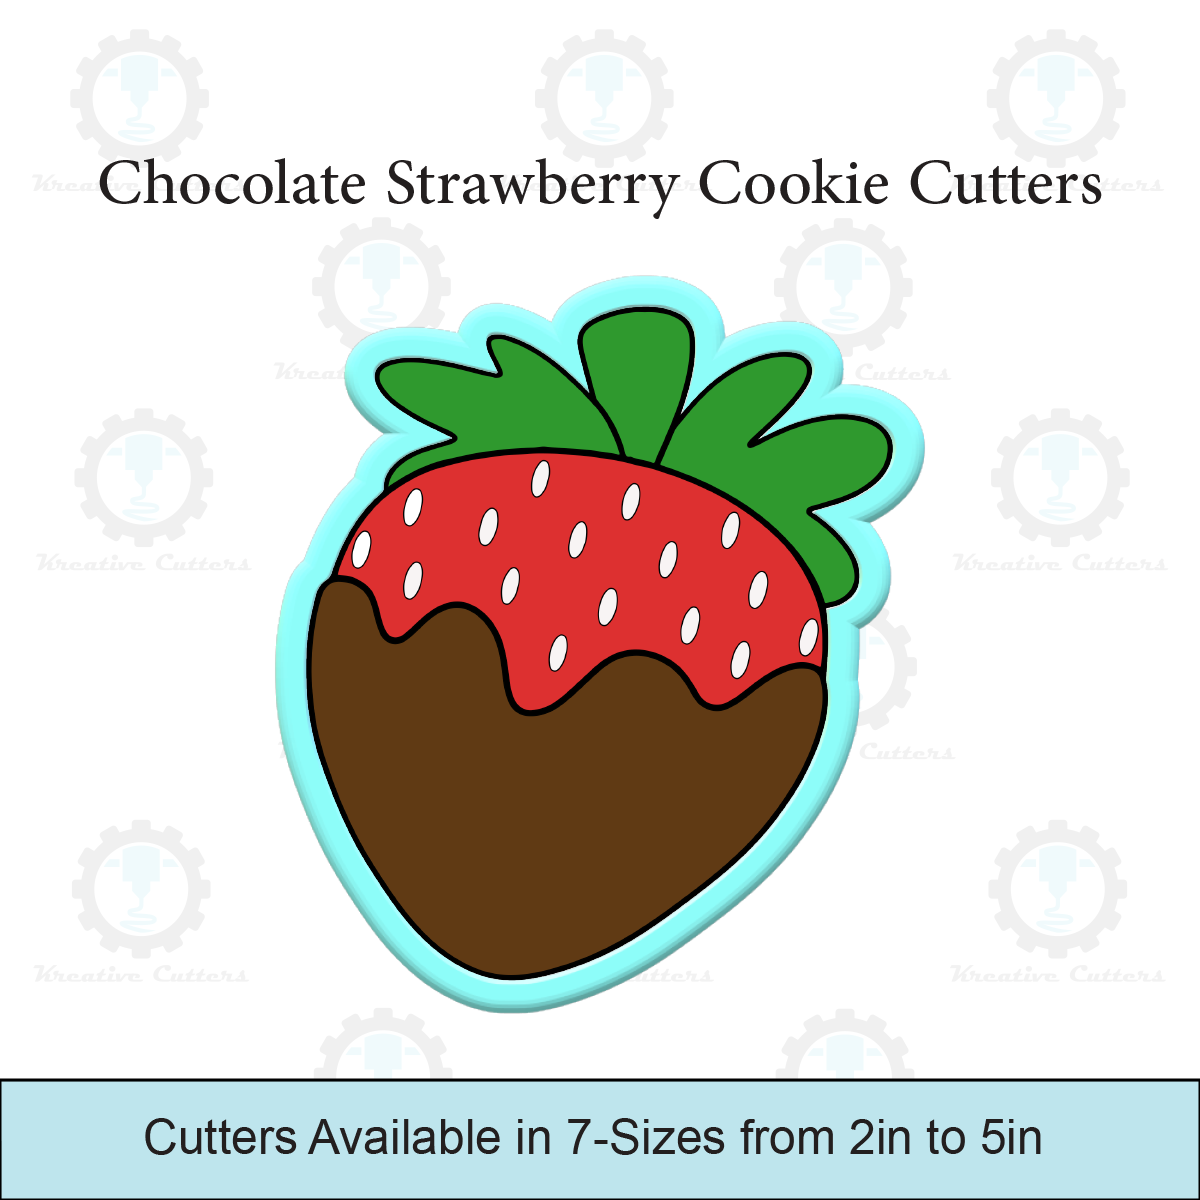 Chocolate Strawberry Cookie Cutters